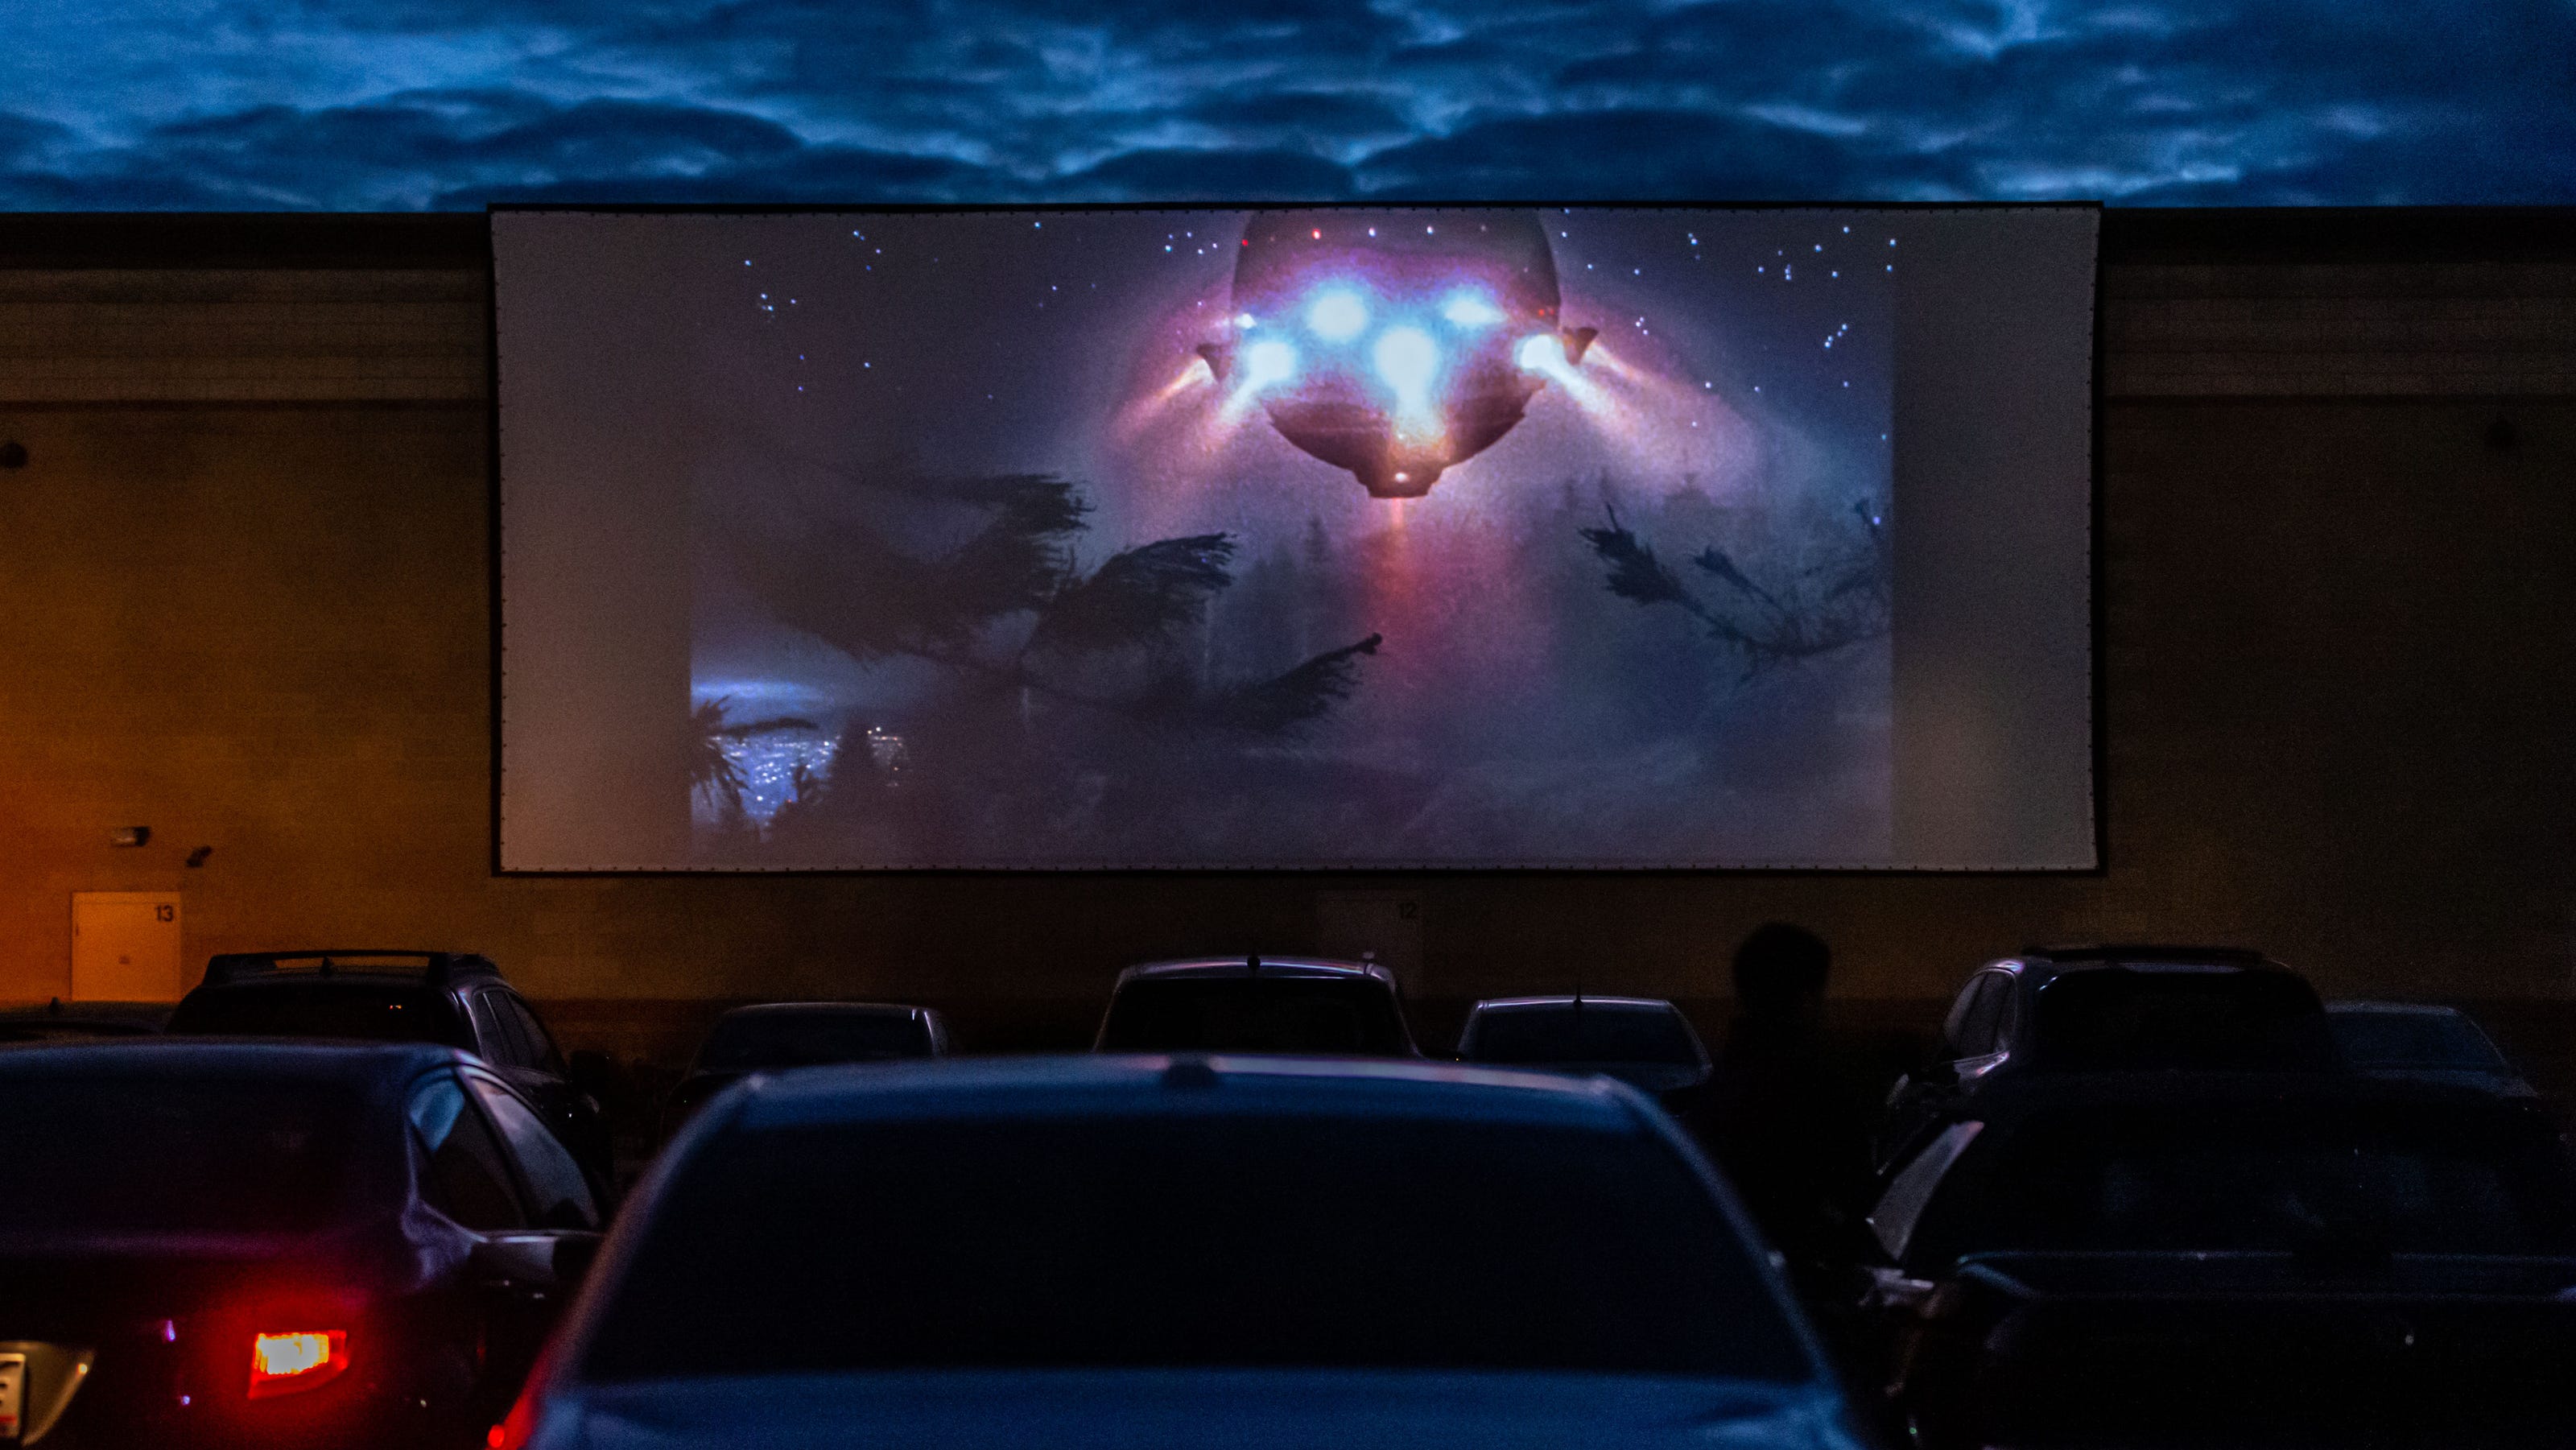 drive in movie theaters in illinois